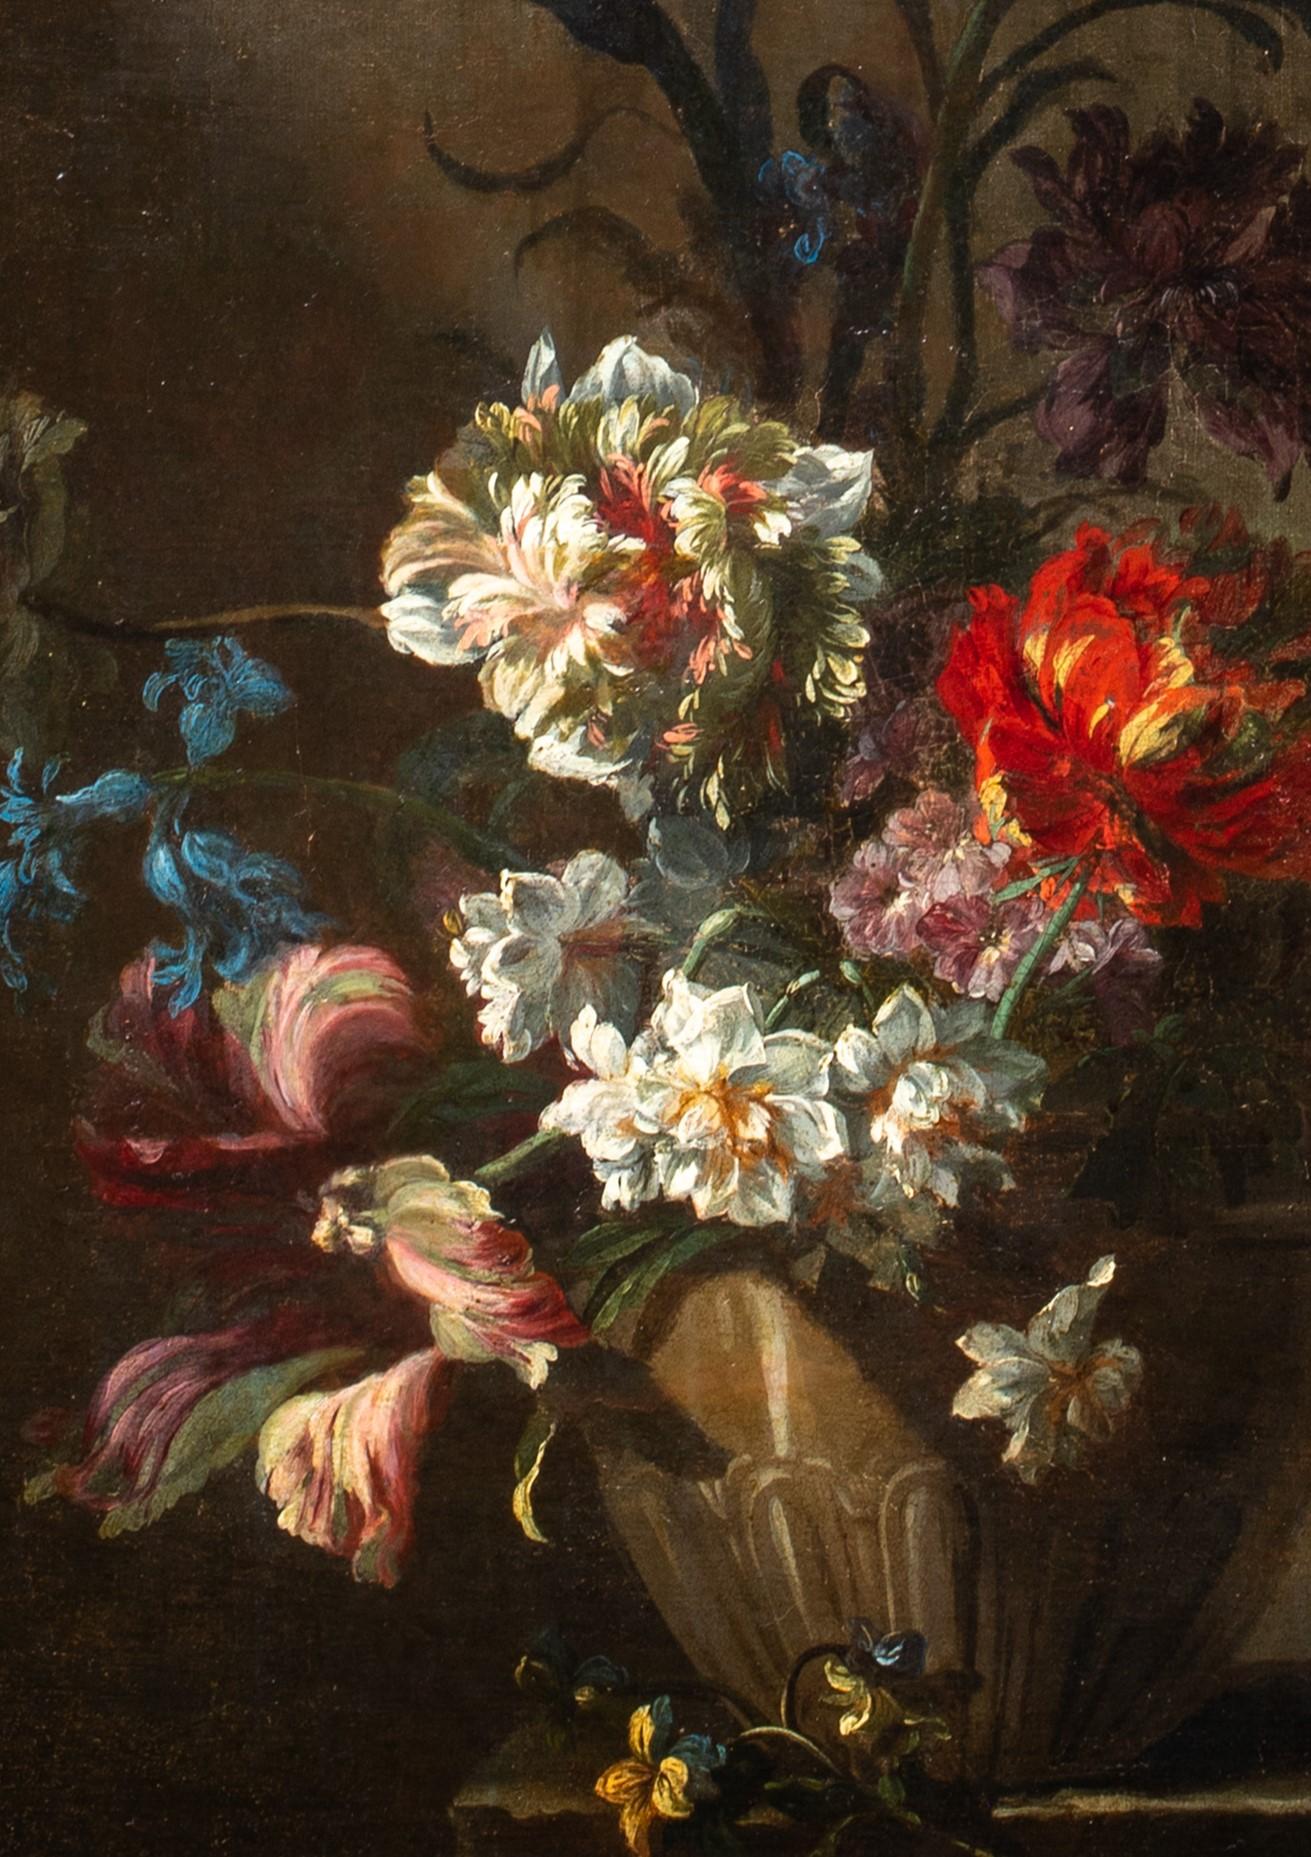 Still Life Of Flowers In A Vase, 17th Century 

circle of  JEAN BAPTISTE MONNOYER (1636-1699)

Large 17th century French Old Master Still Life of various flowers in a vase upon a mantle, oil on canvas by Jean Baptiste Monnoyer. Excellent quality and